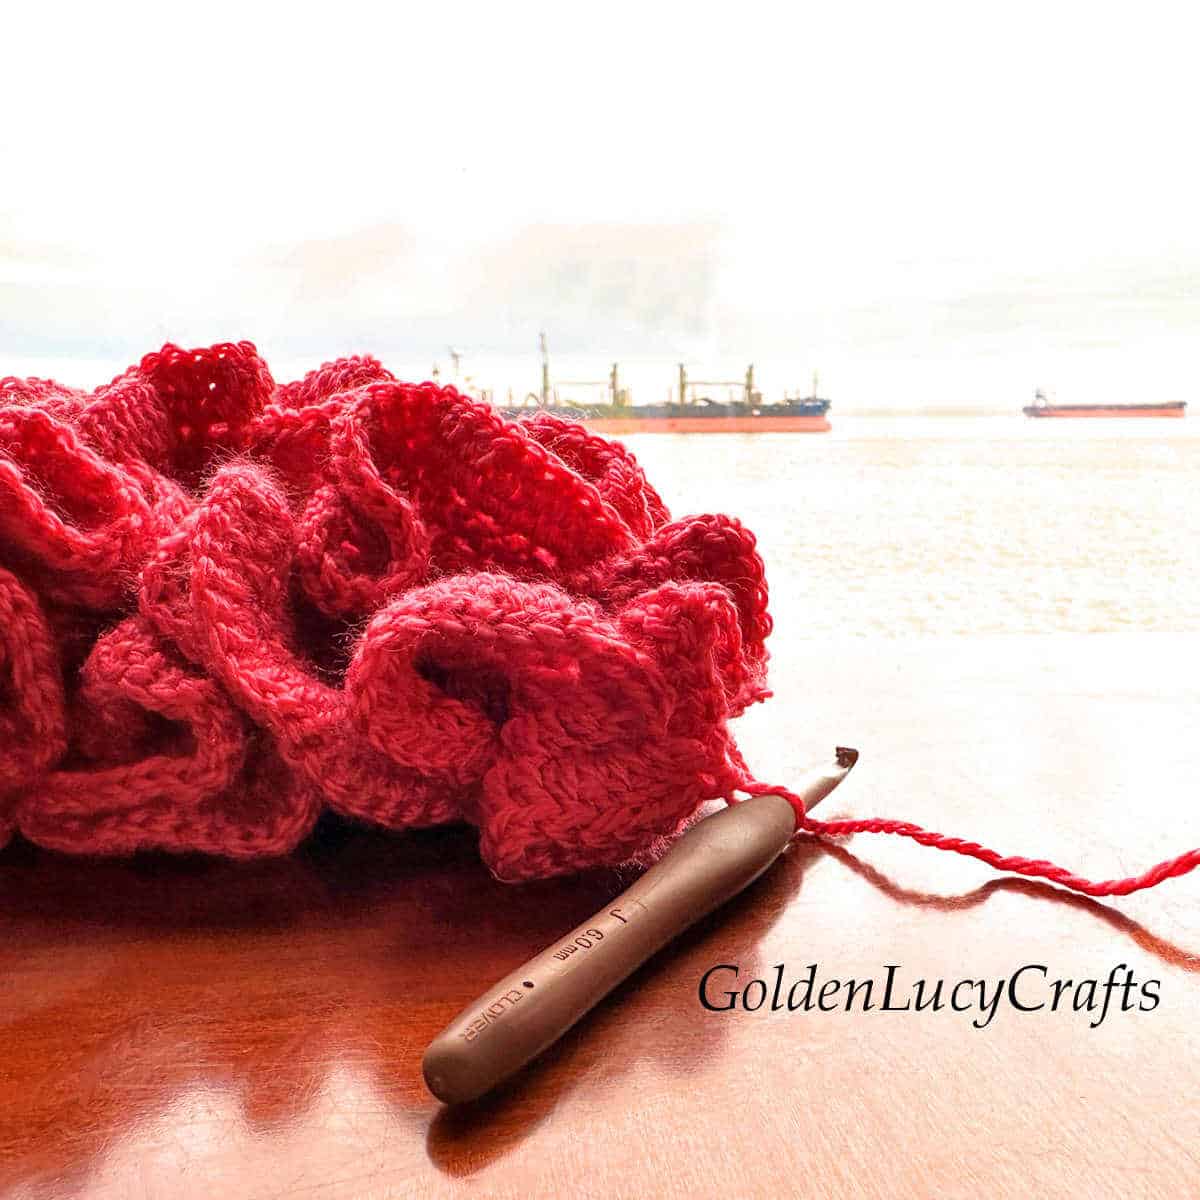 Crochet coral and crochet hook laying on the table in front of the window.